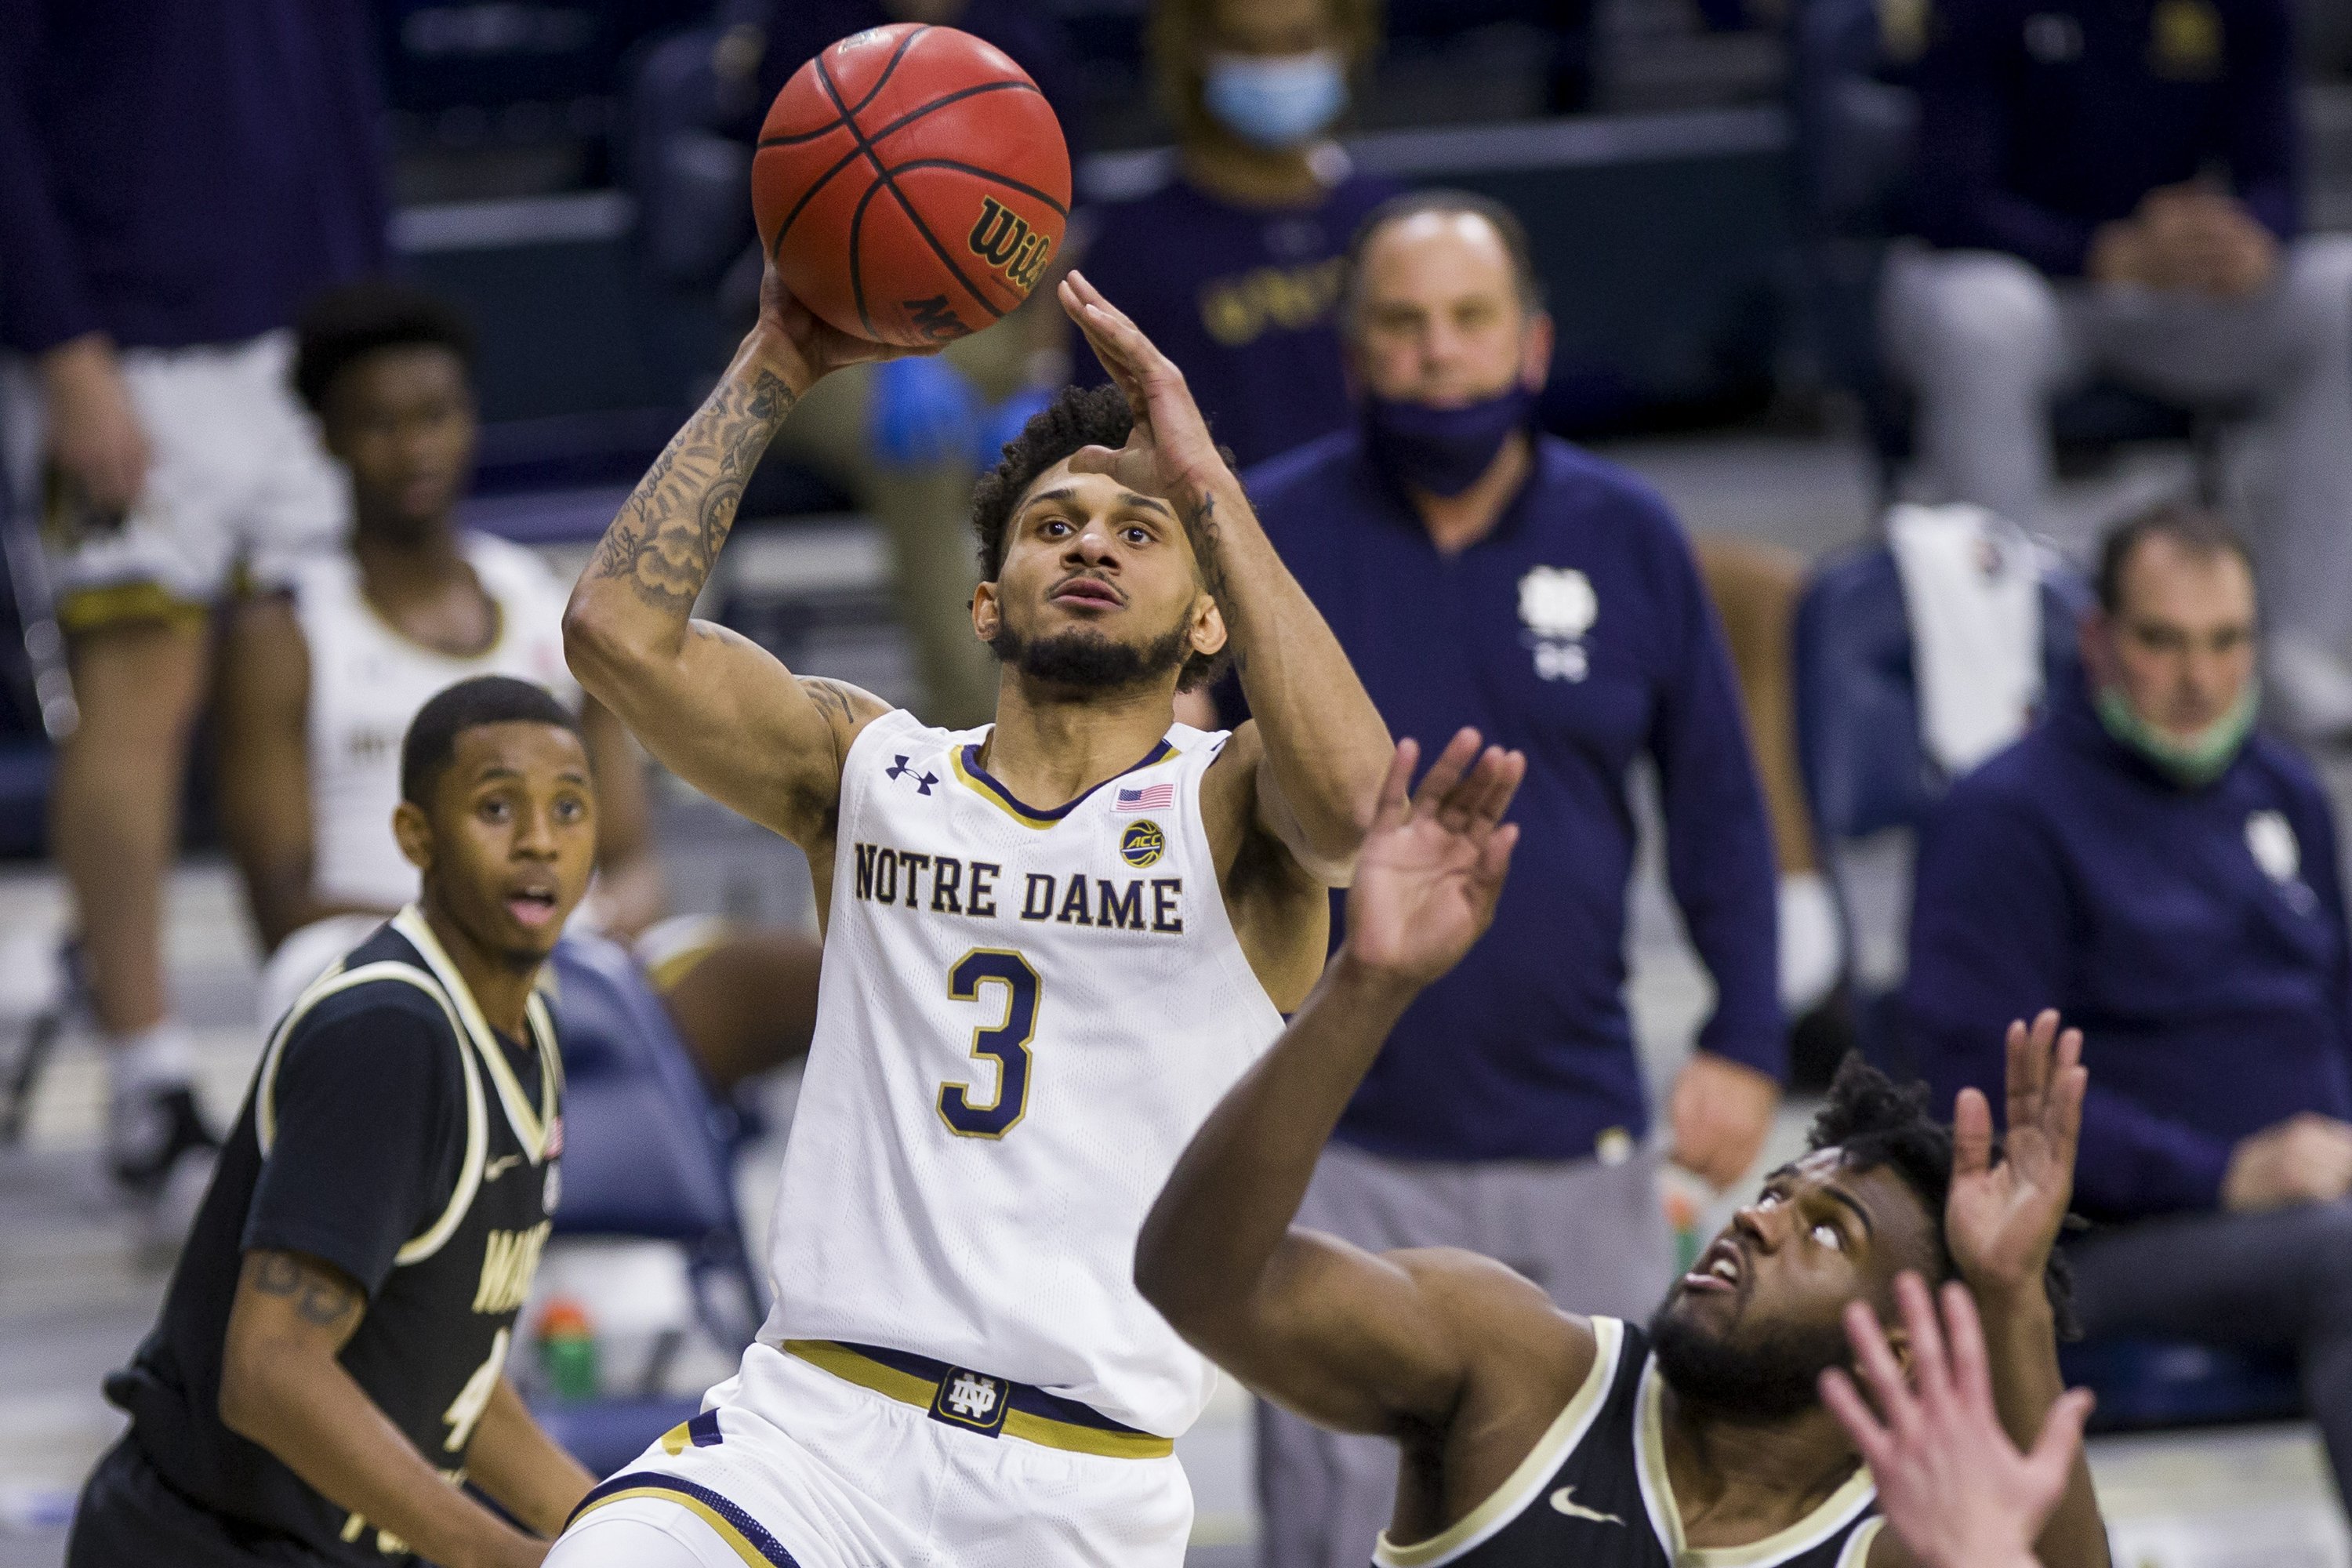 Notre Dame opens 2nd half on 160 run, beats Wake Forest AP News